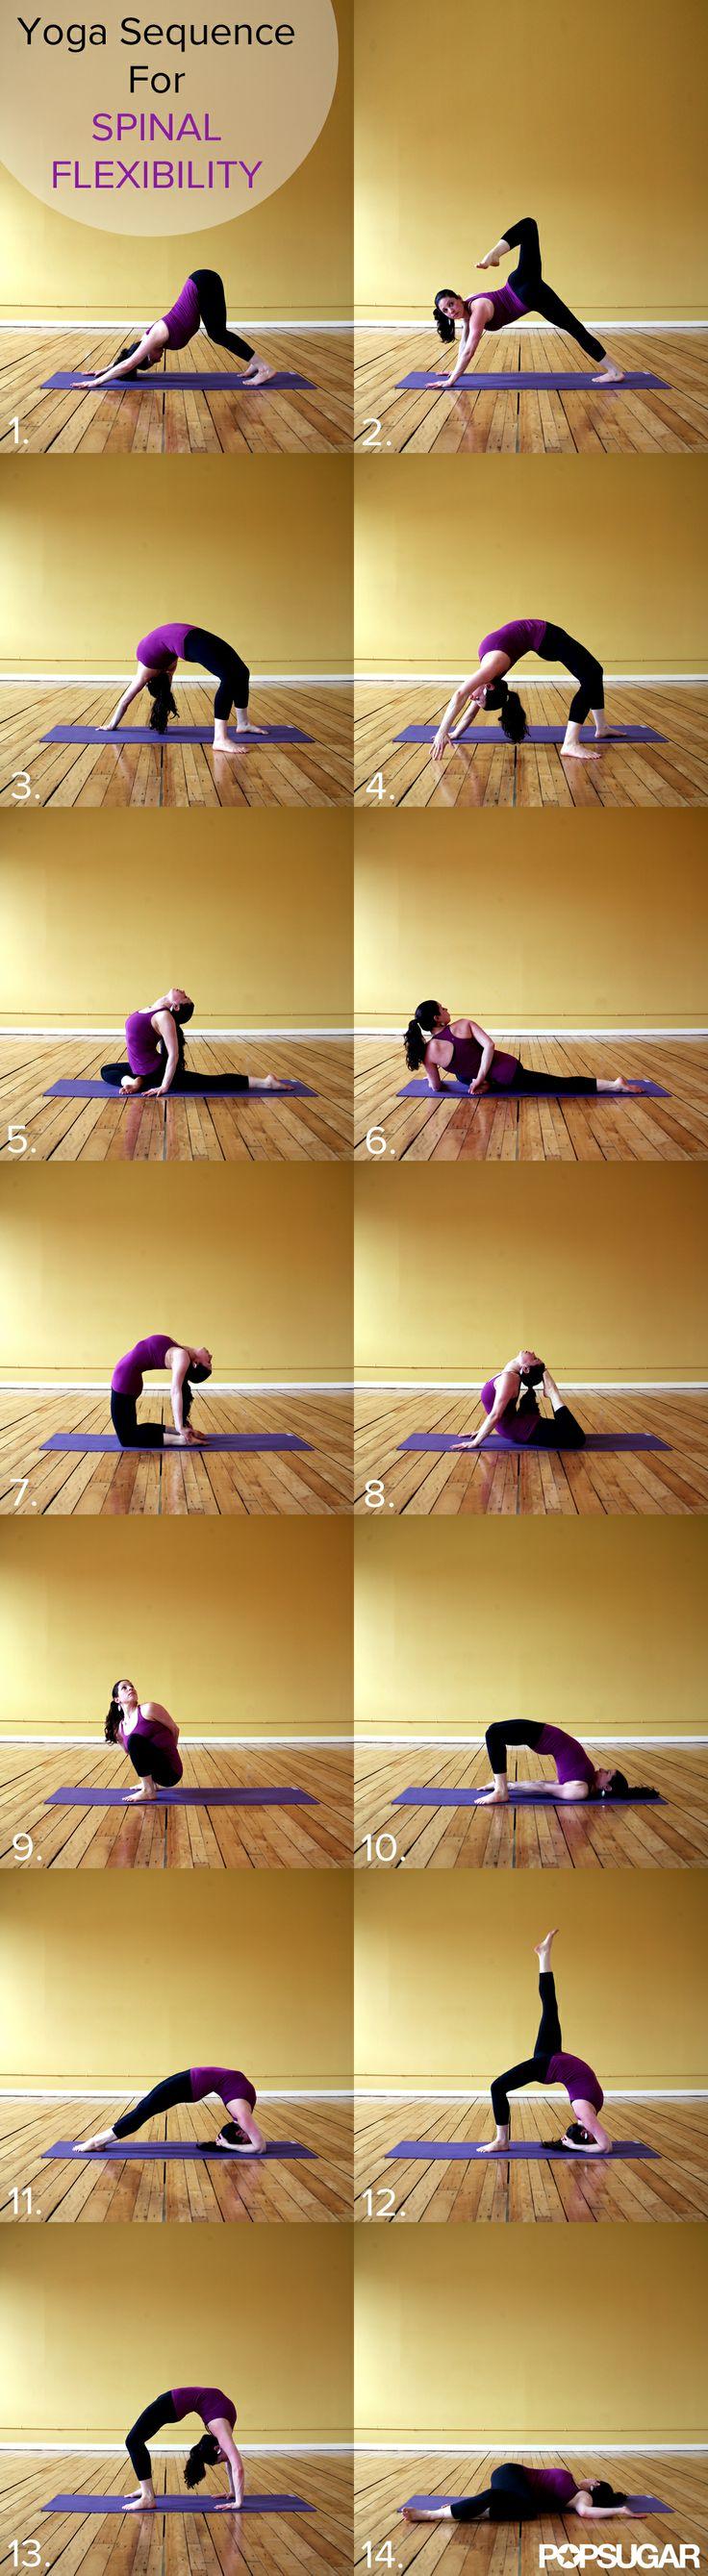 Wedding - Strong And Supple: Yoga Sequence For Spinal Flexibility